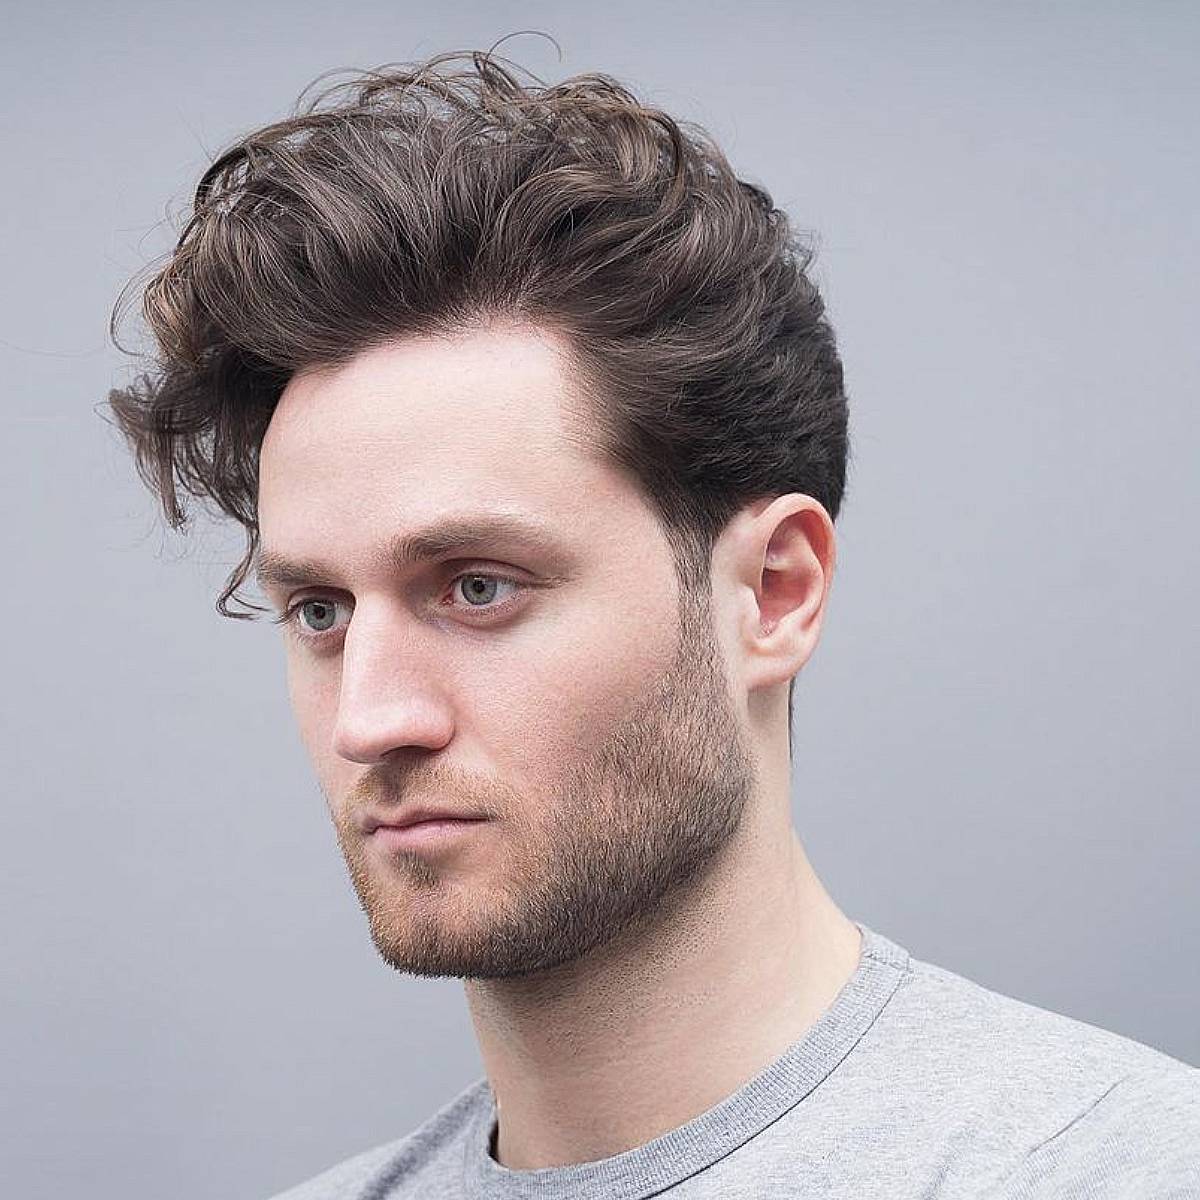 Hairstyles For Men With Medium Hair 1x1 1 